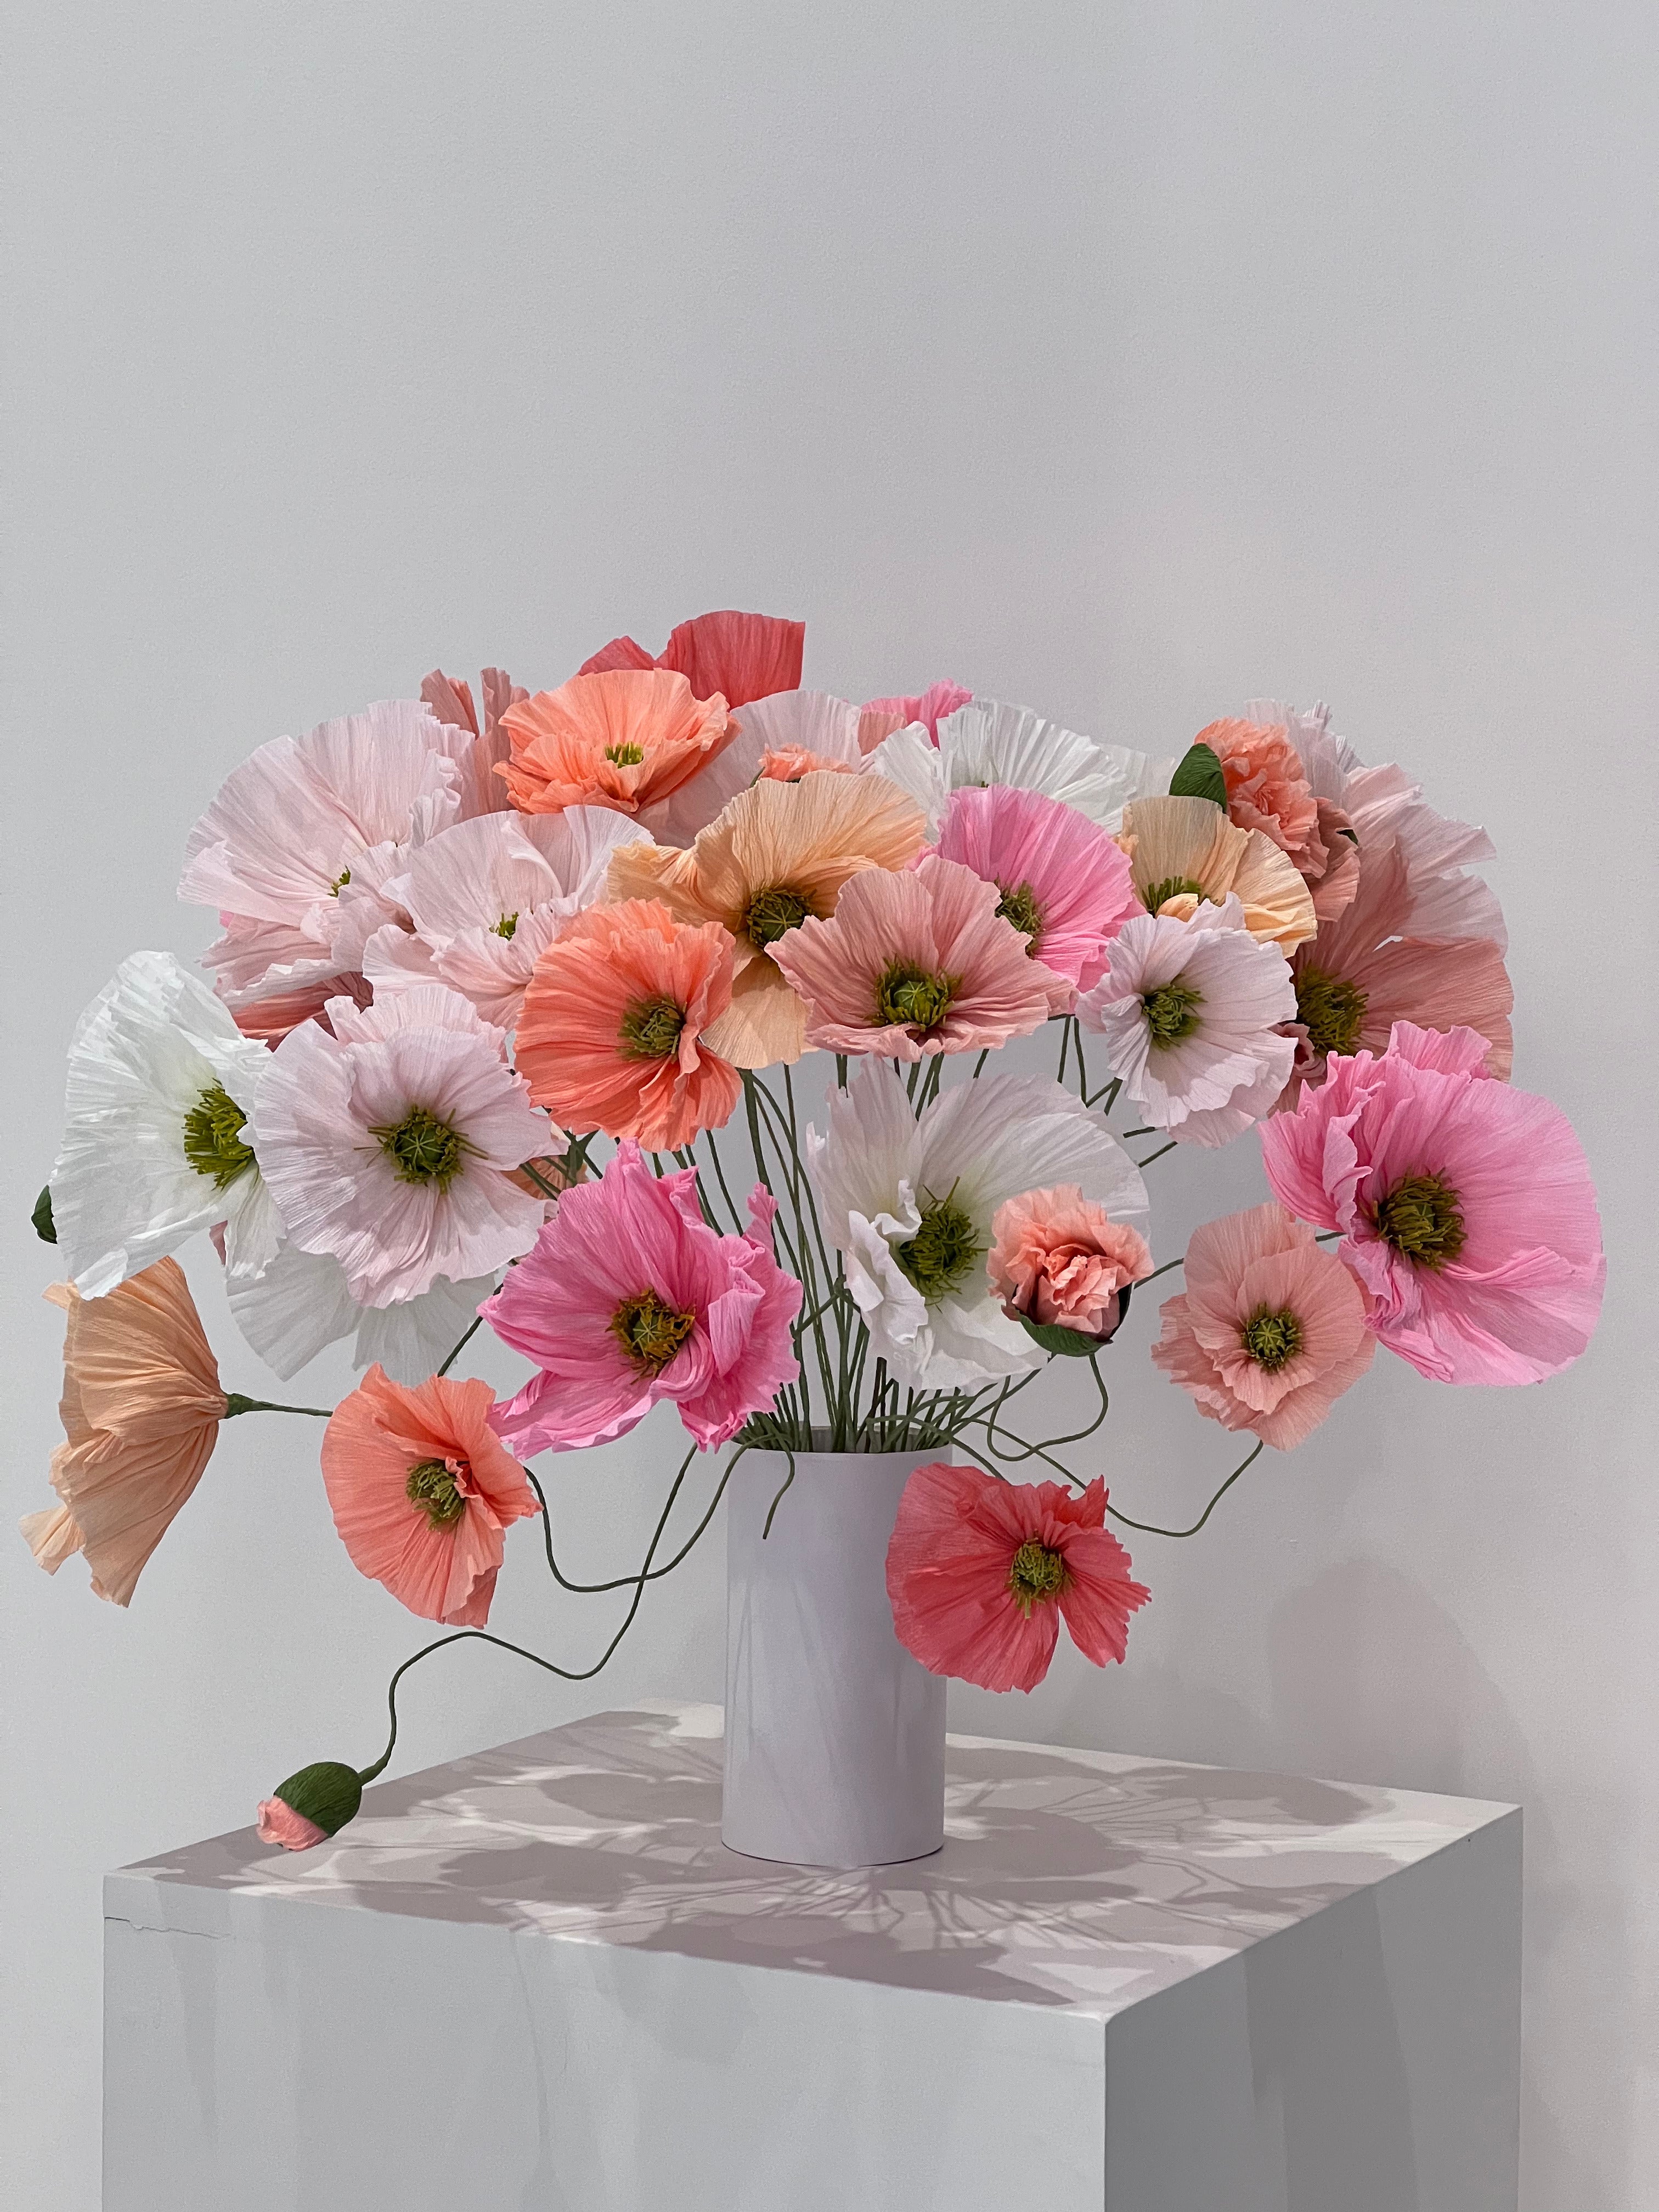 Paper poppies artfully arranged in a cascading formation, creating a sense of movement and grace.